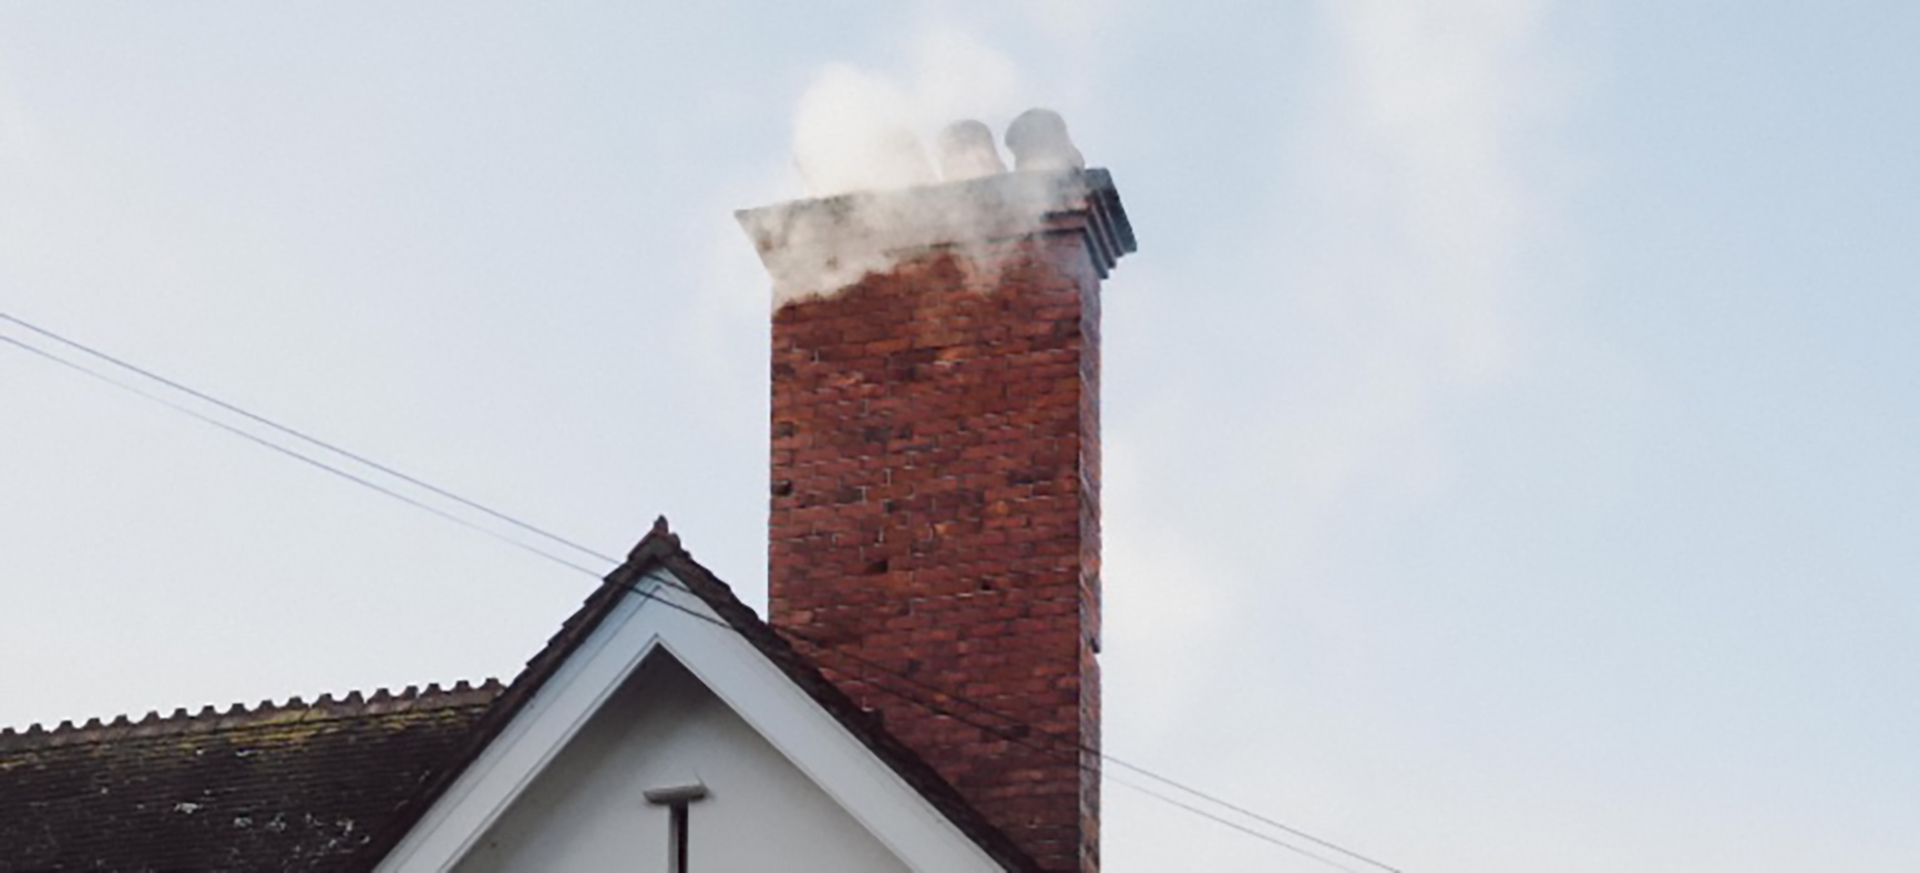 A chimney on a roof